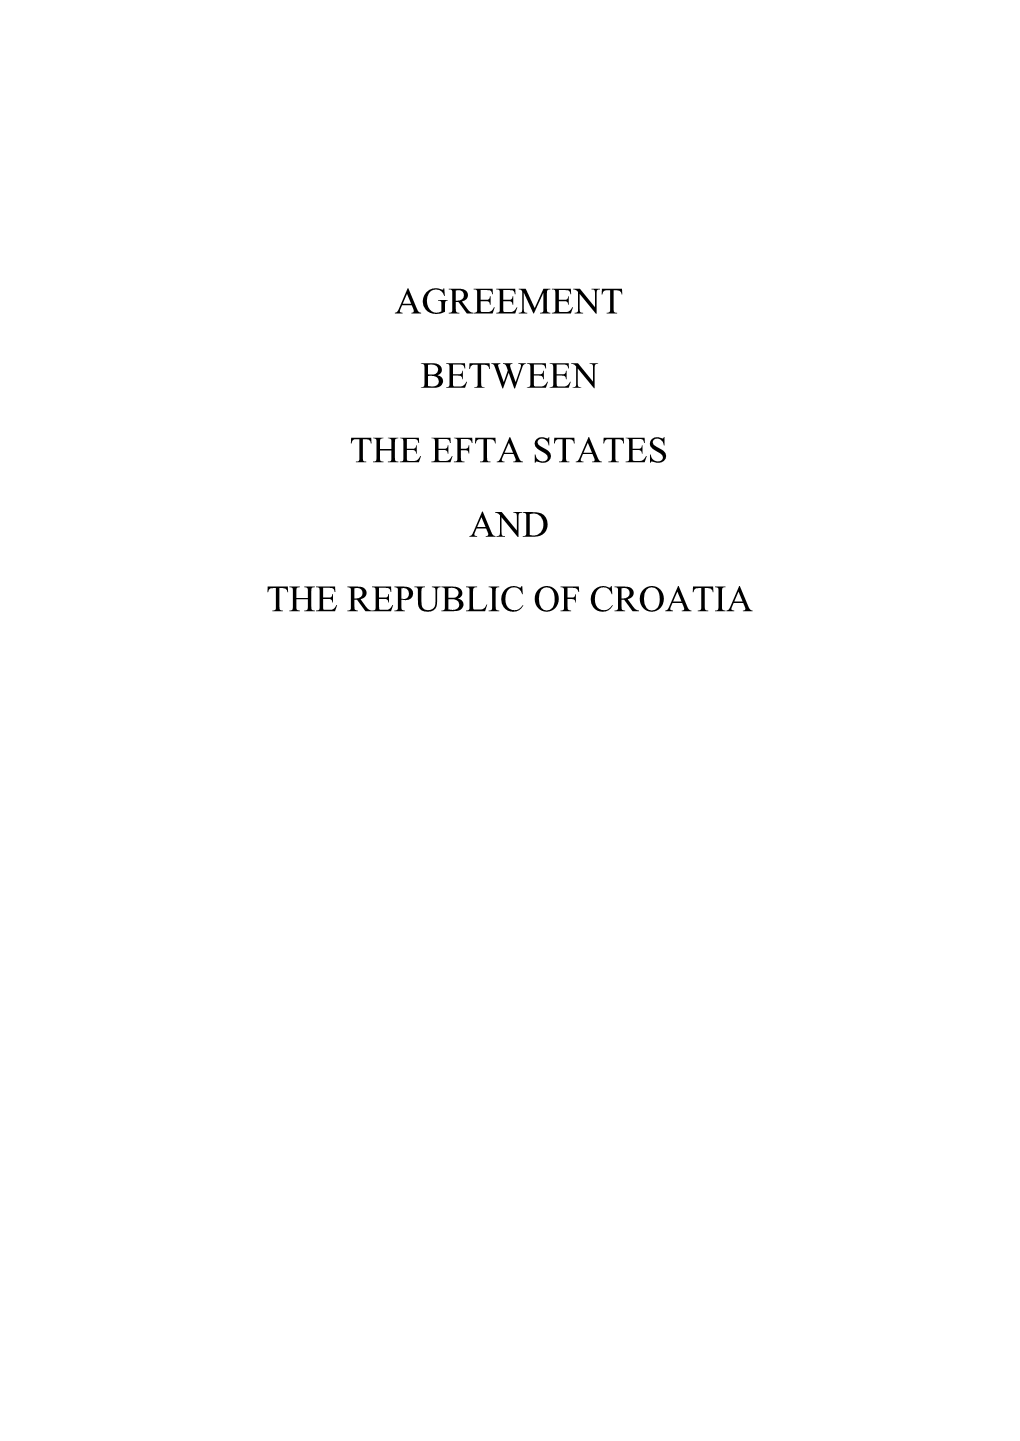 Agreement Between the Efta States and the Republic Of